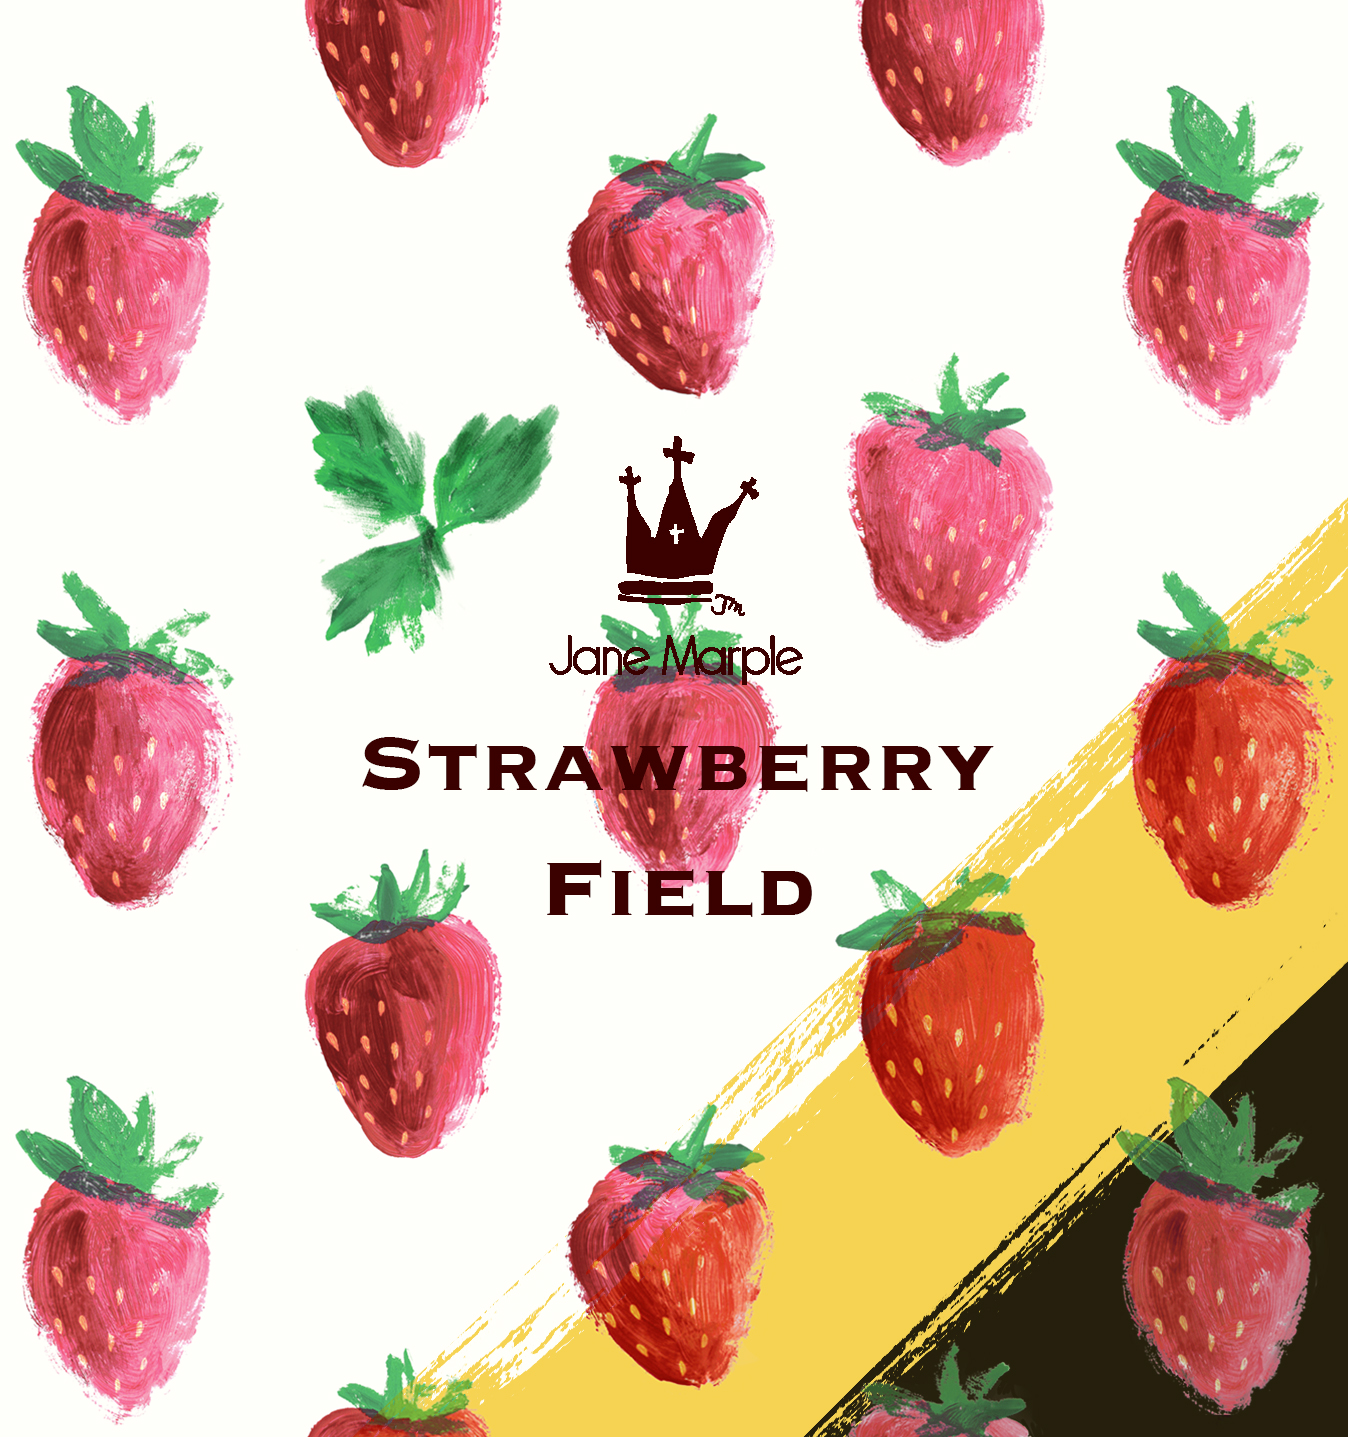 Strawberry field | Jane Marple Official Web Site | St.Mary Mead